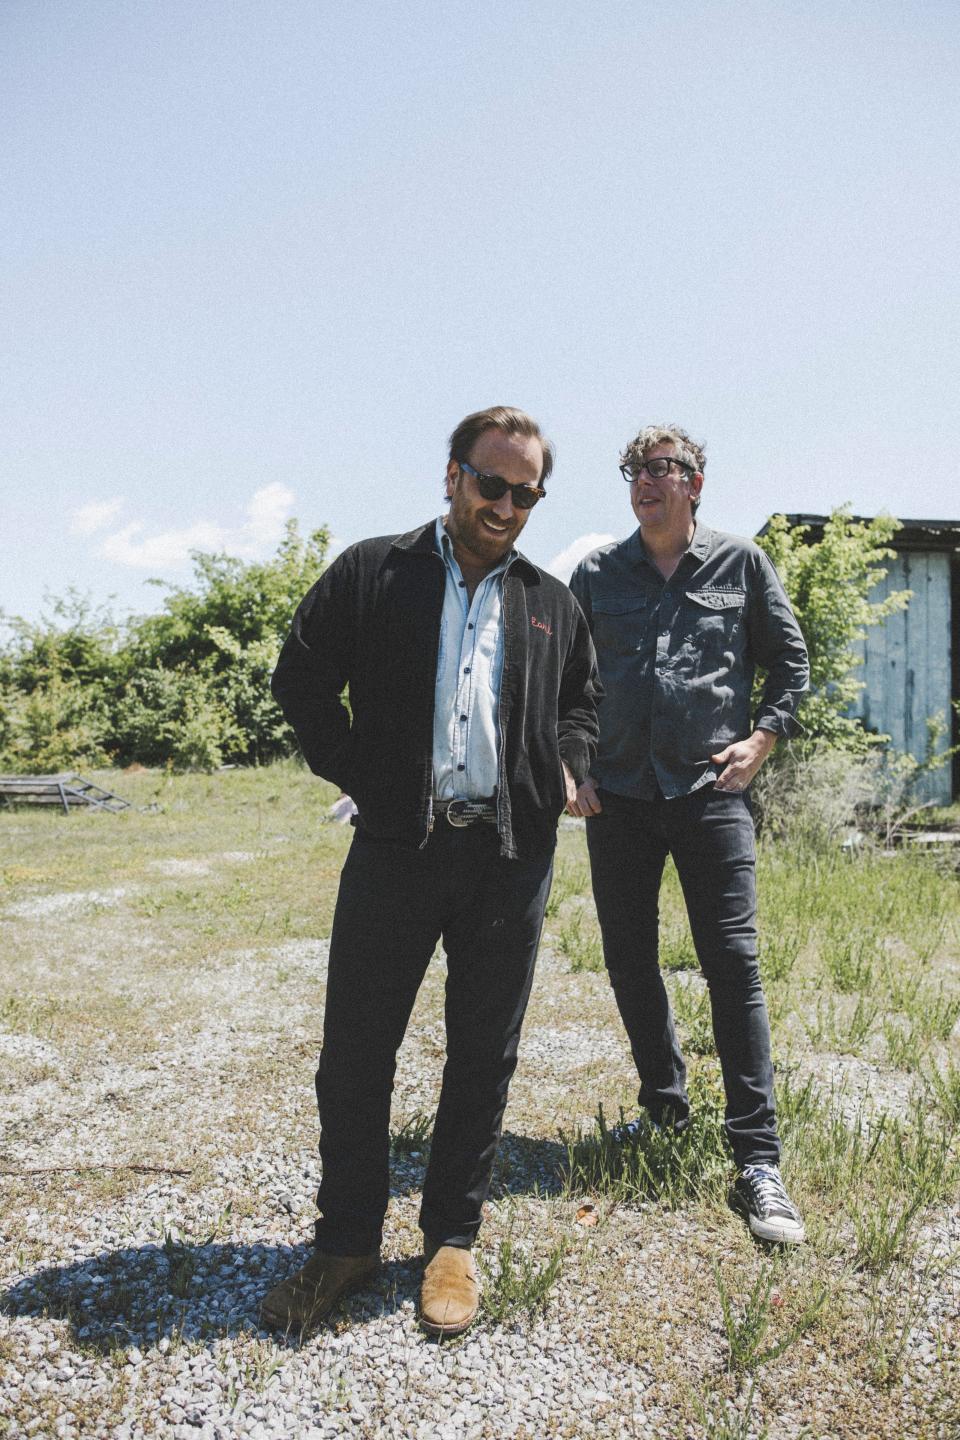 Dan Auerbach (left) and Patrick Carney (right) of the Black Keys